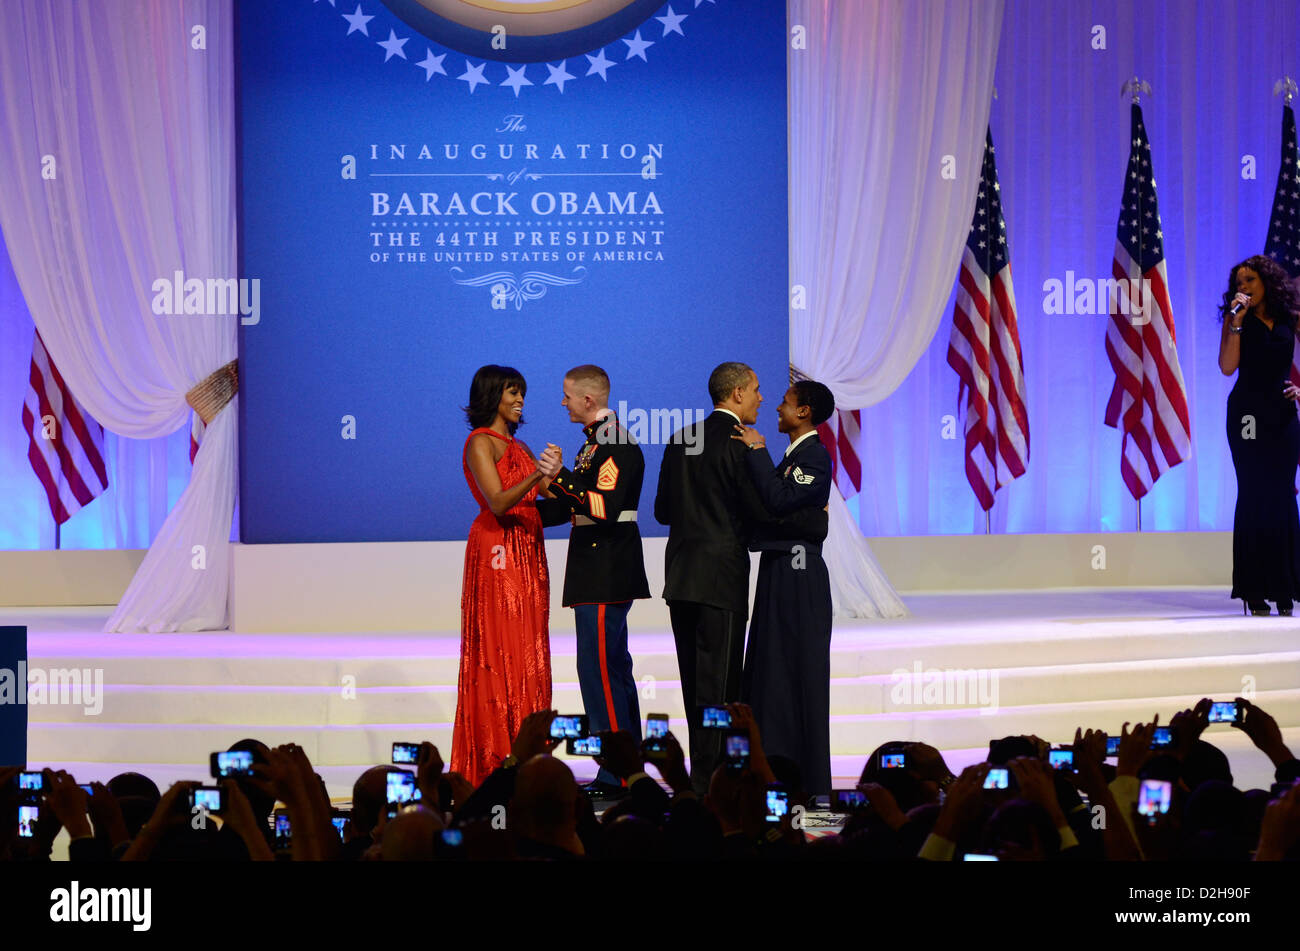 US President Barack Obama dances with Air Force Staff Sgt. Bria Nelson as First Lady Michelle Obama dances with Gunnery Sgt. Timothy Easterling at the Commander in Chief's Ball January 21, 2013 at the Washington Convention Center in Washington, DC. Stock Photo